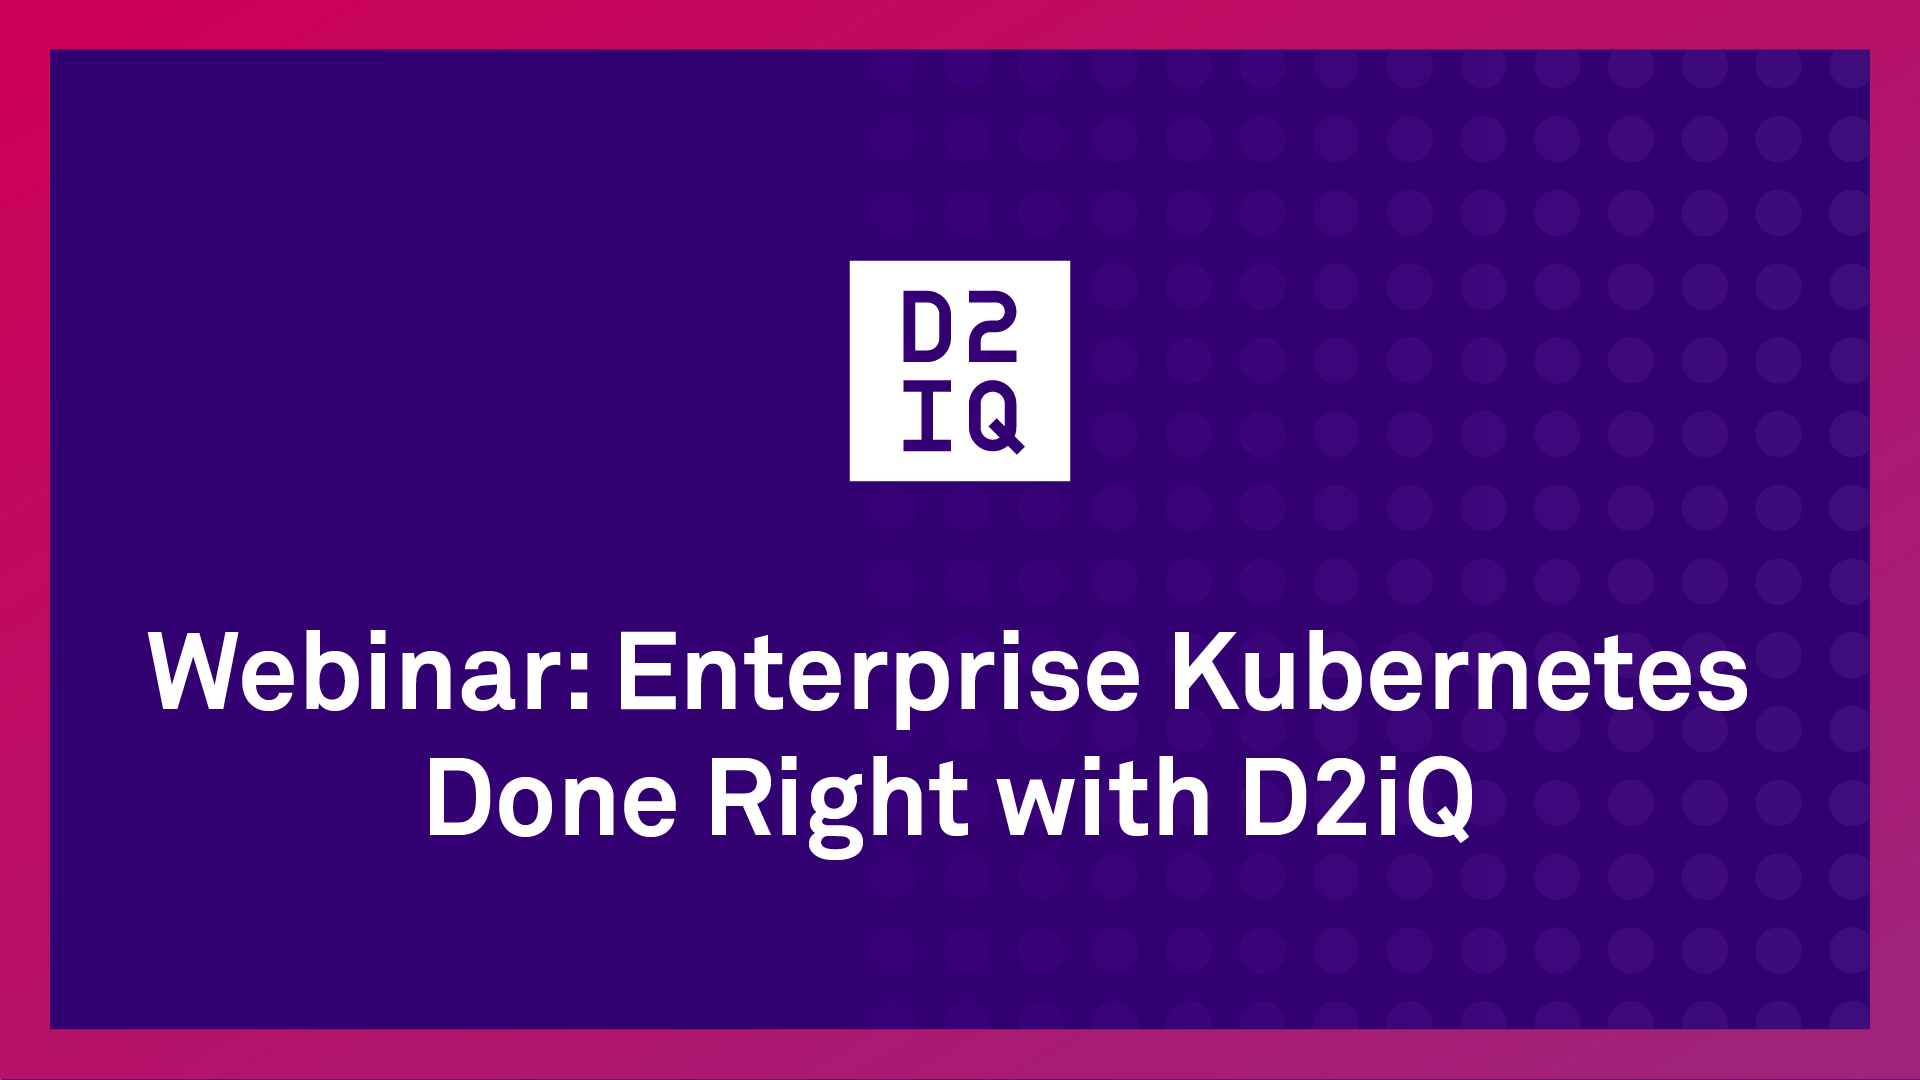 Webinar: Enterprise Kubernetes Done Right with D2iQ